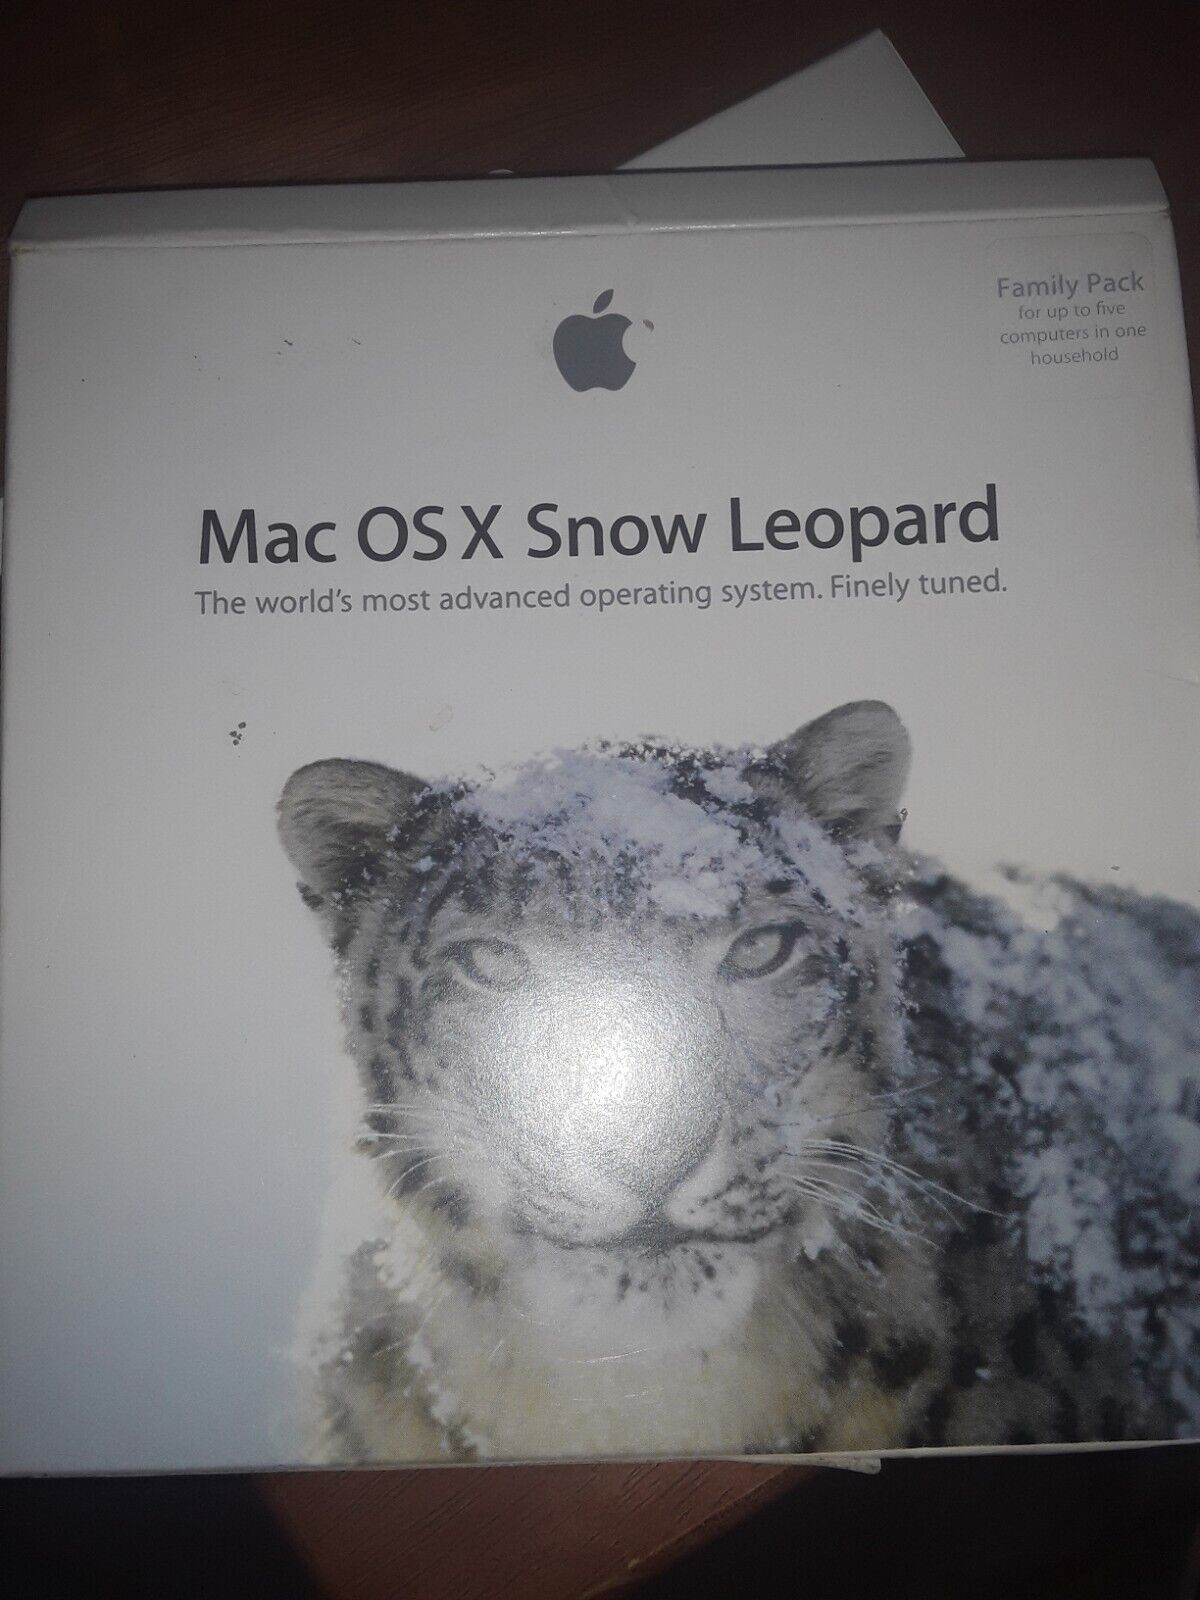 Apple Snow Leopard Mac OS X 10.6 Operation System 5 Up To 5 Users